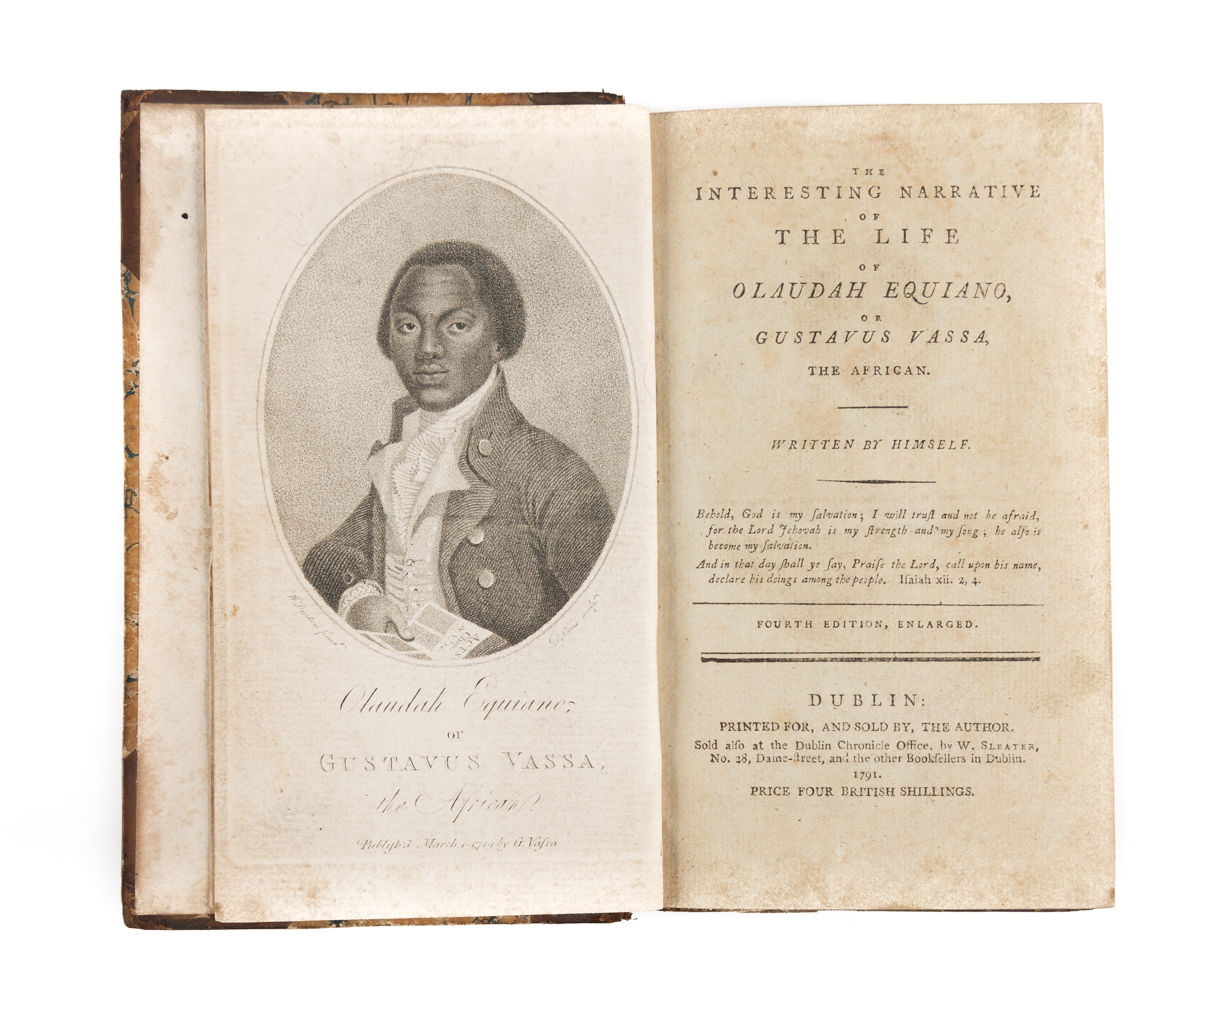 The Interesting Narrative Of The Life Of Olaudah Equiano, Or ...